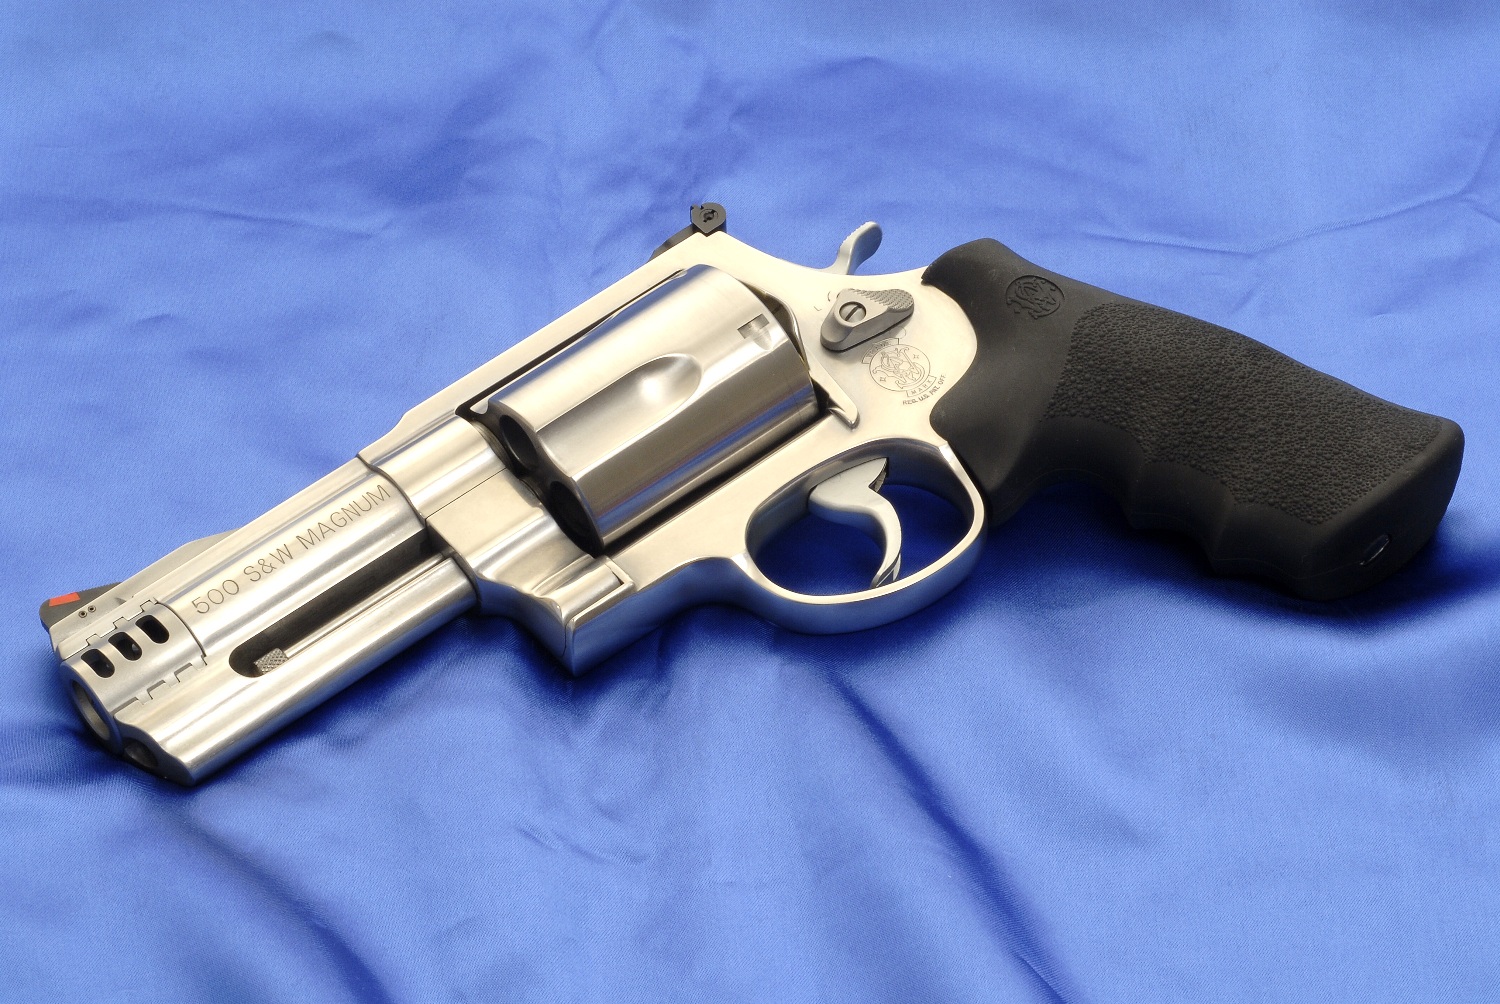 weapons-smith-wesson-500-magnum